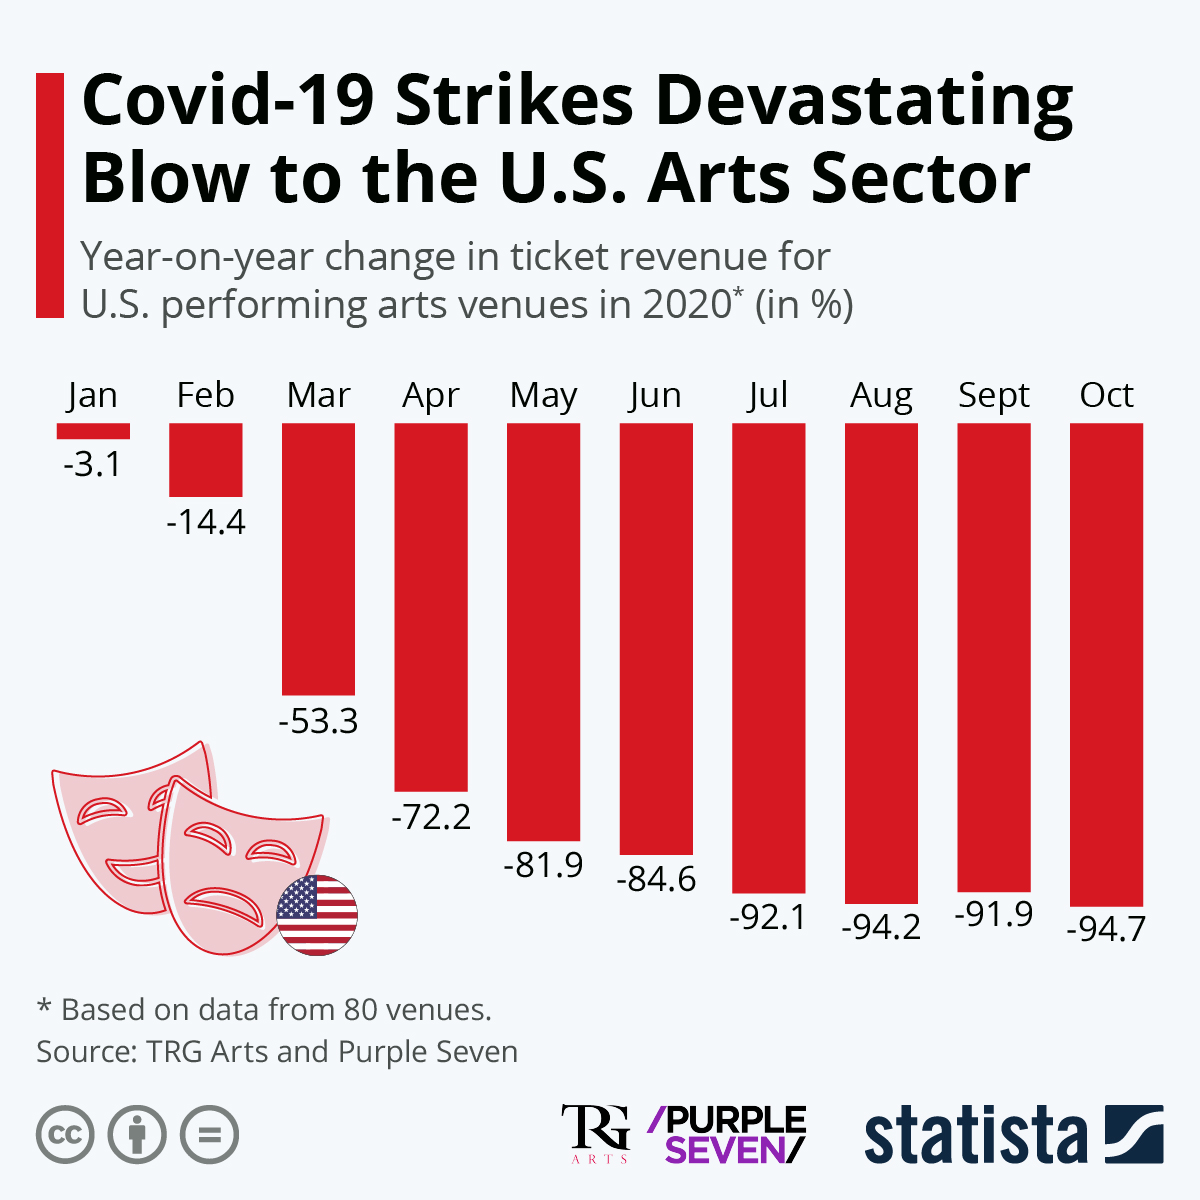 COVID-19 Strikes Devastating Blow to the U.S. Arts Sector